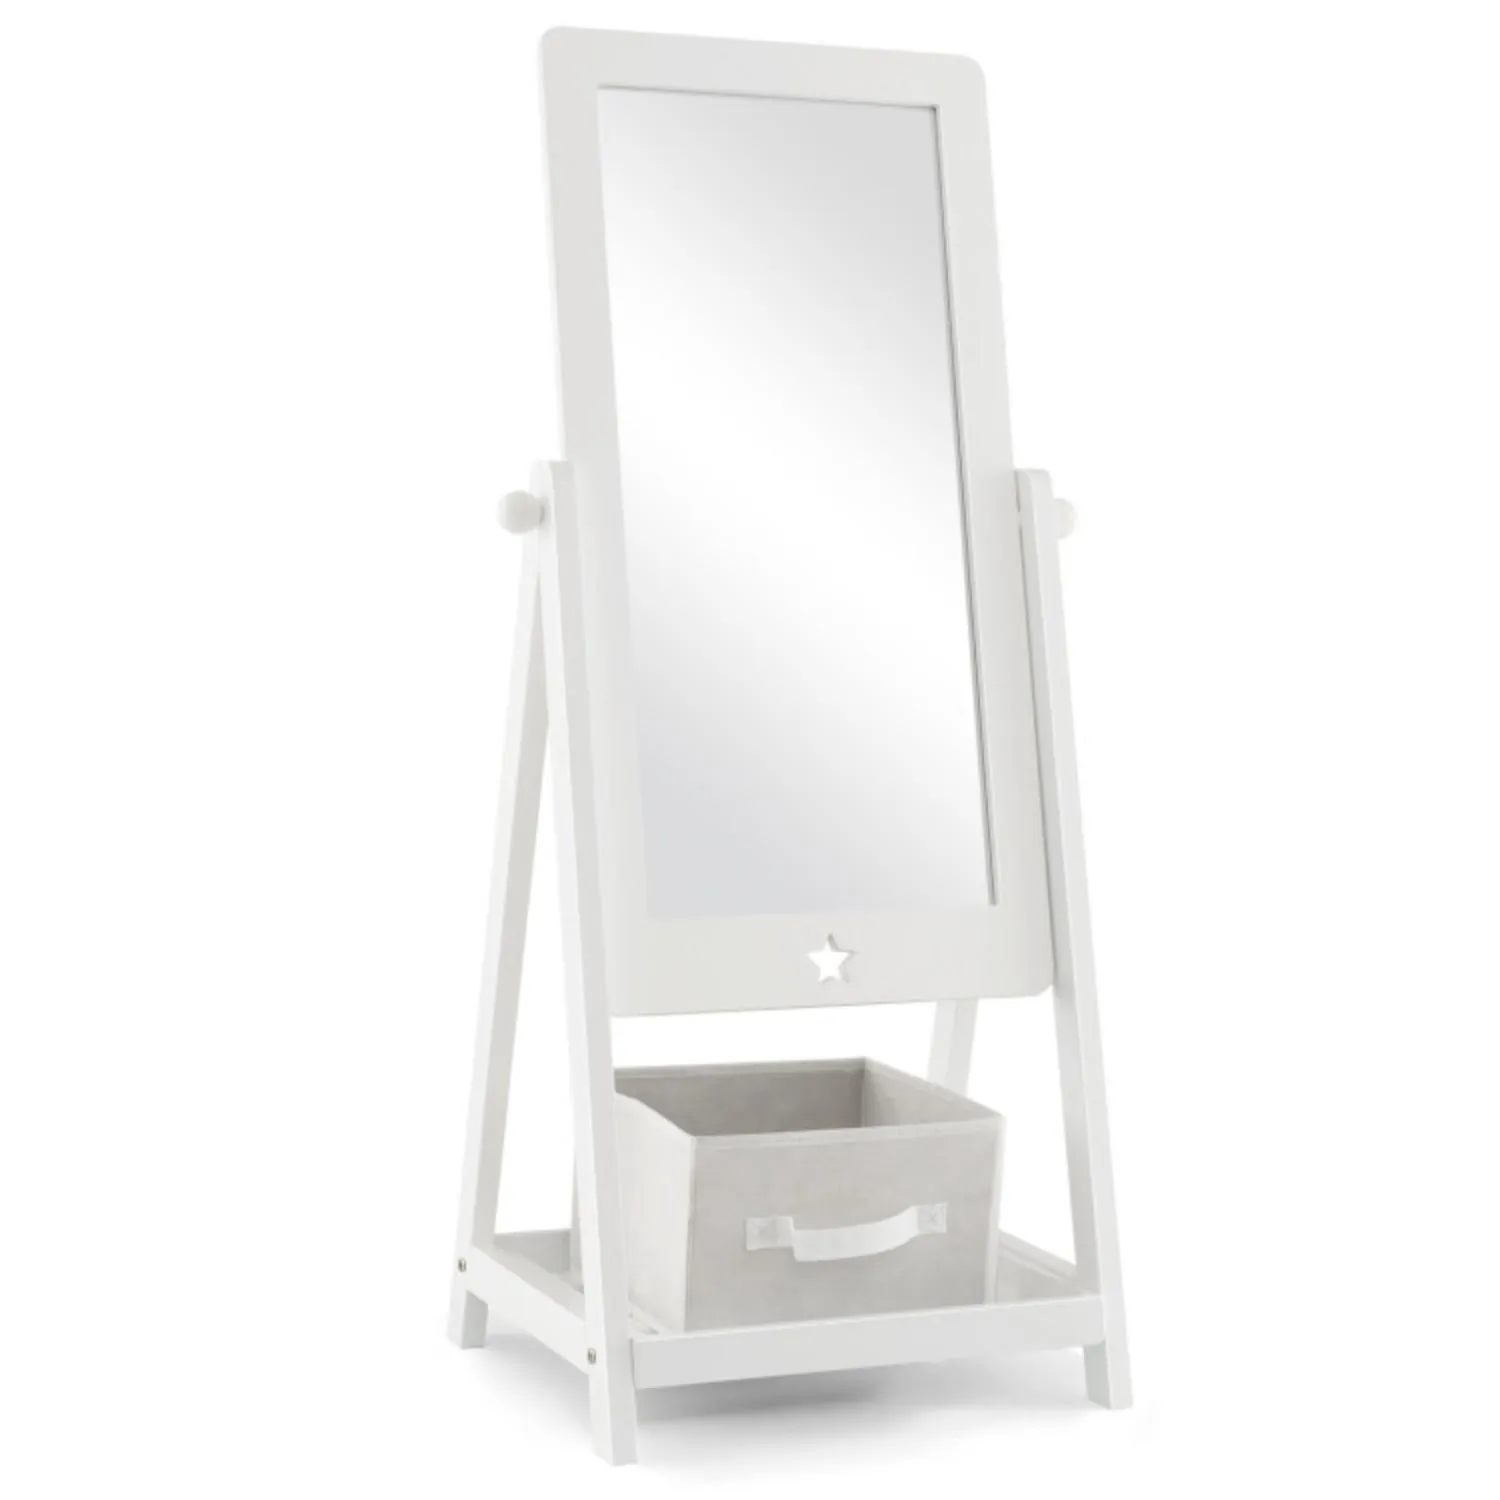 Hivvago Kids Full Length Wooden Standing Mirror with Bottom Shelf and Foldable Storage Bin-White